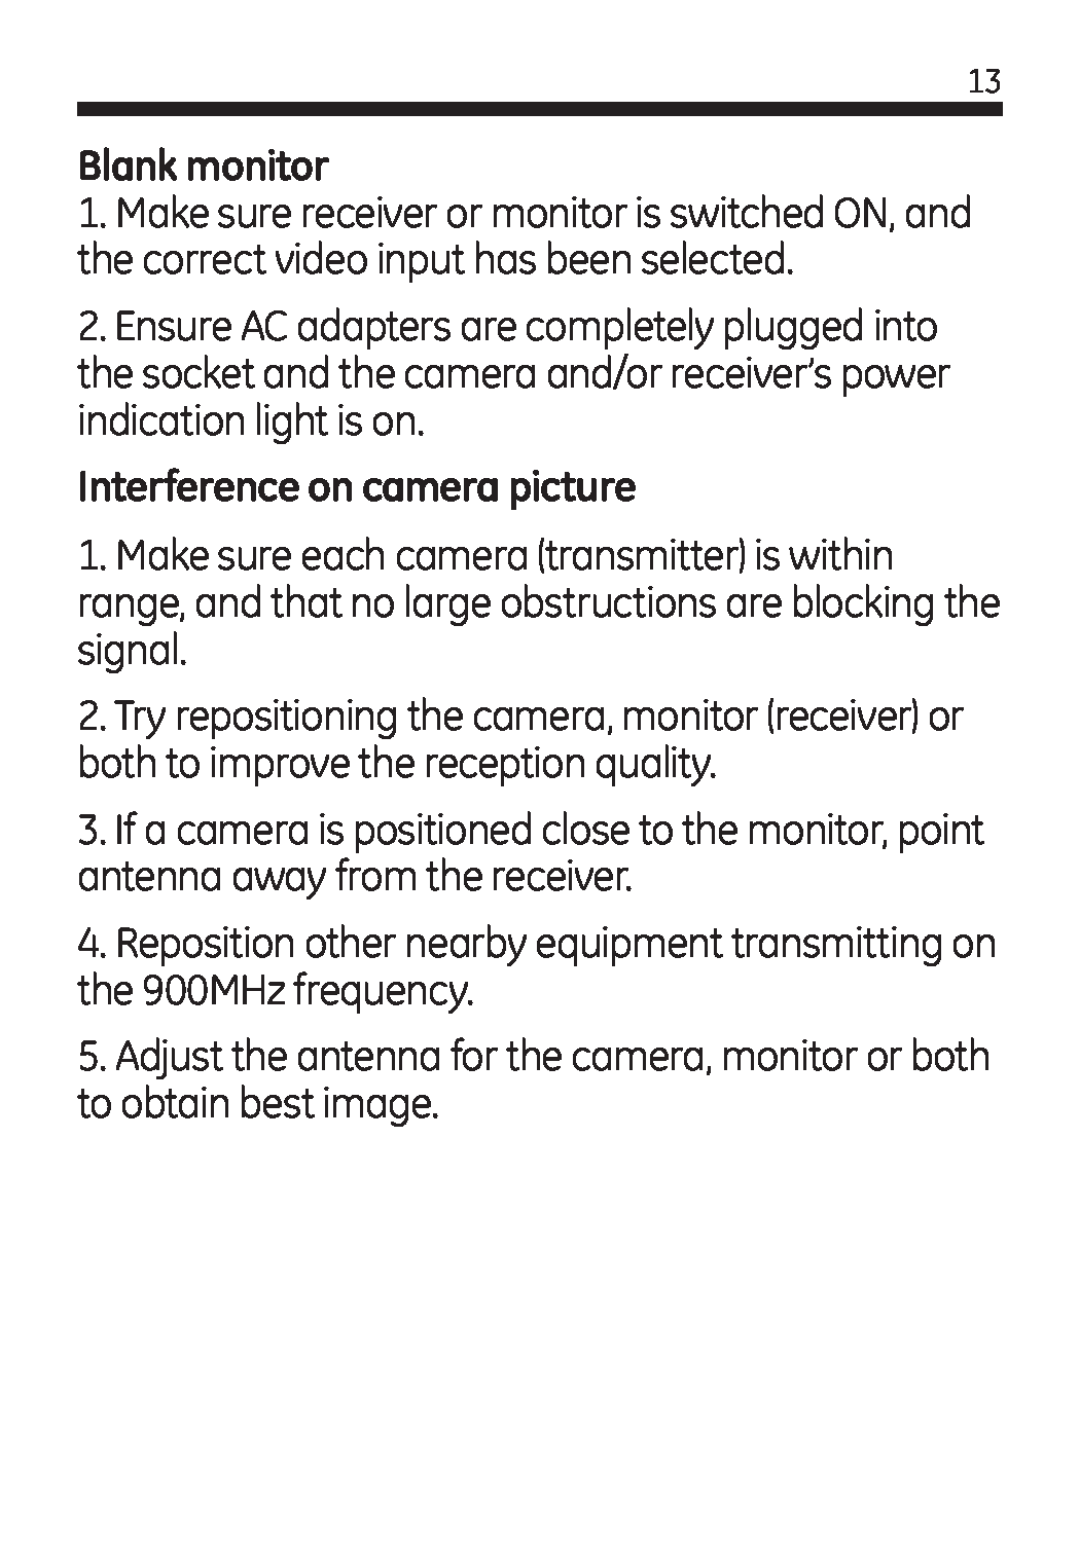 Jasco 45245 user manual Blank monitor, Interference on camera picture 